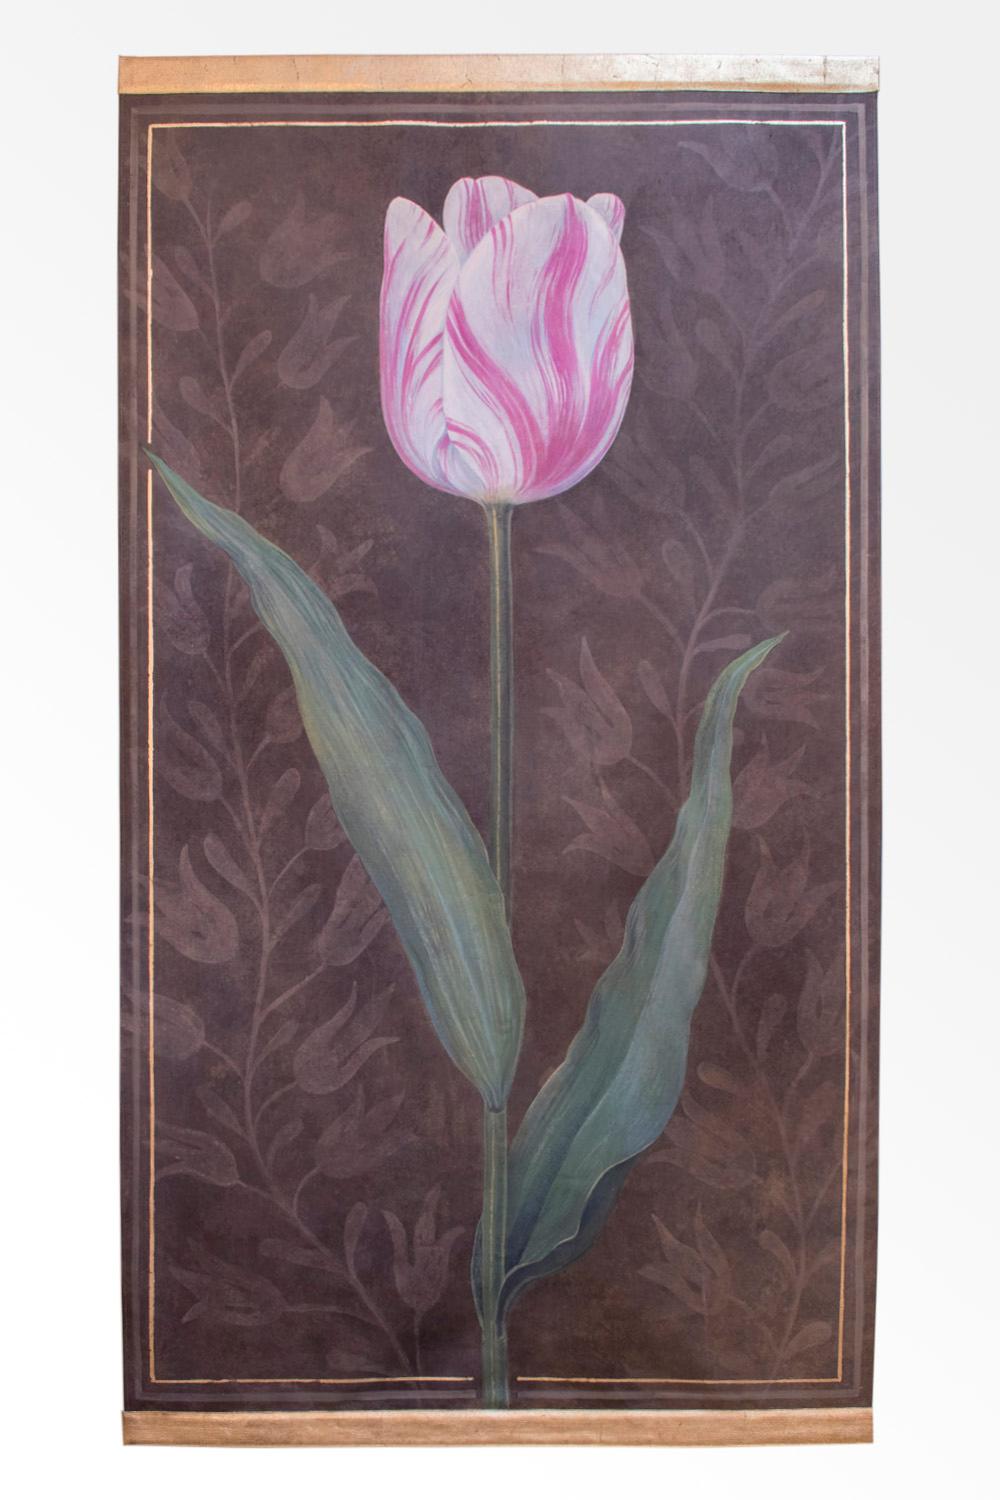 Painted canvas figuring a large white and pink tulip. Brown background with a foliage decor in the same tones. Thin gilt frame.

Linen raw canvas hand painted with natural pigments and background gilt with copper leaf. Canvas stretched thanks to